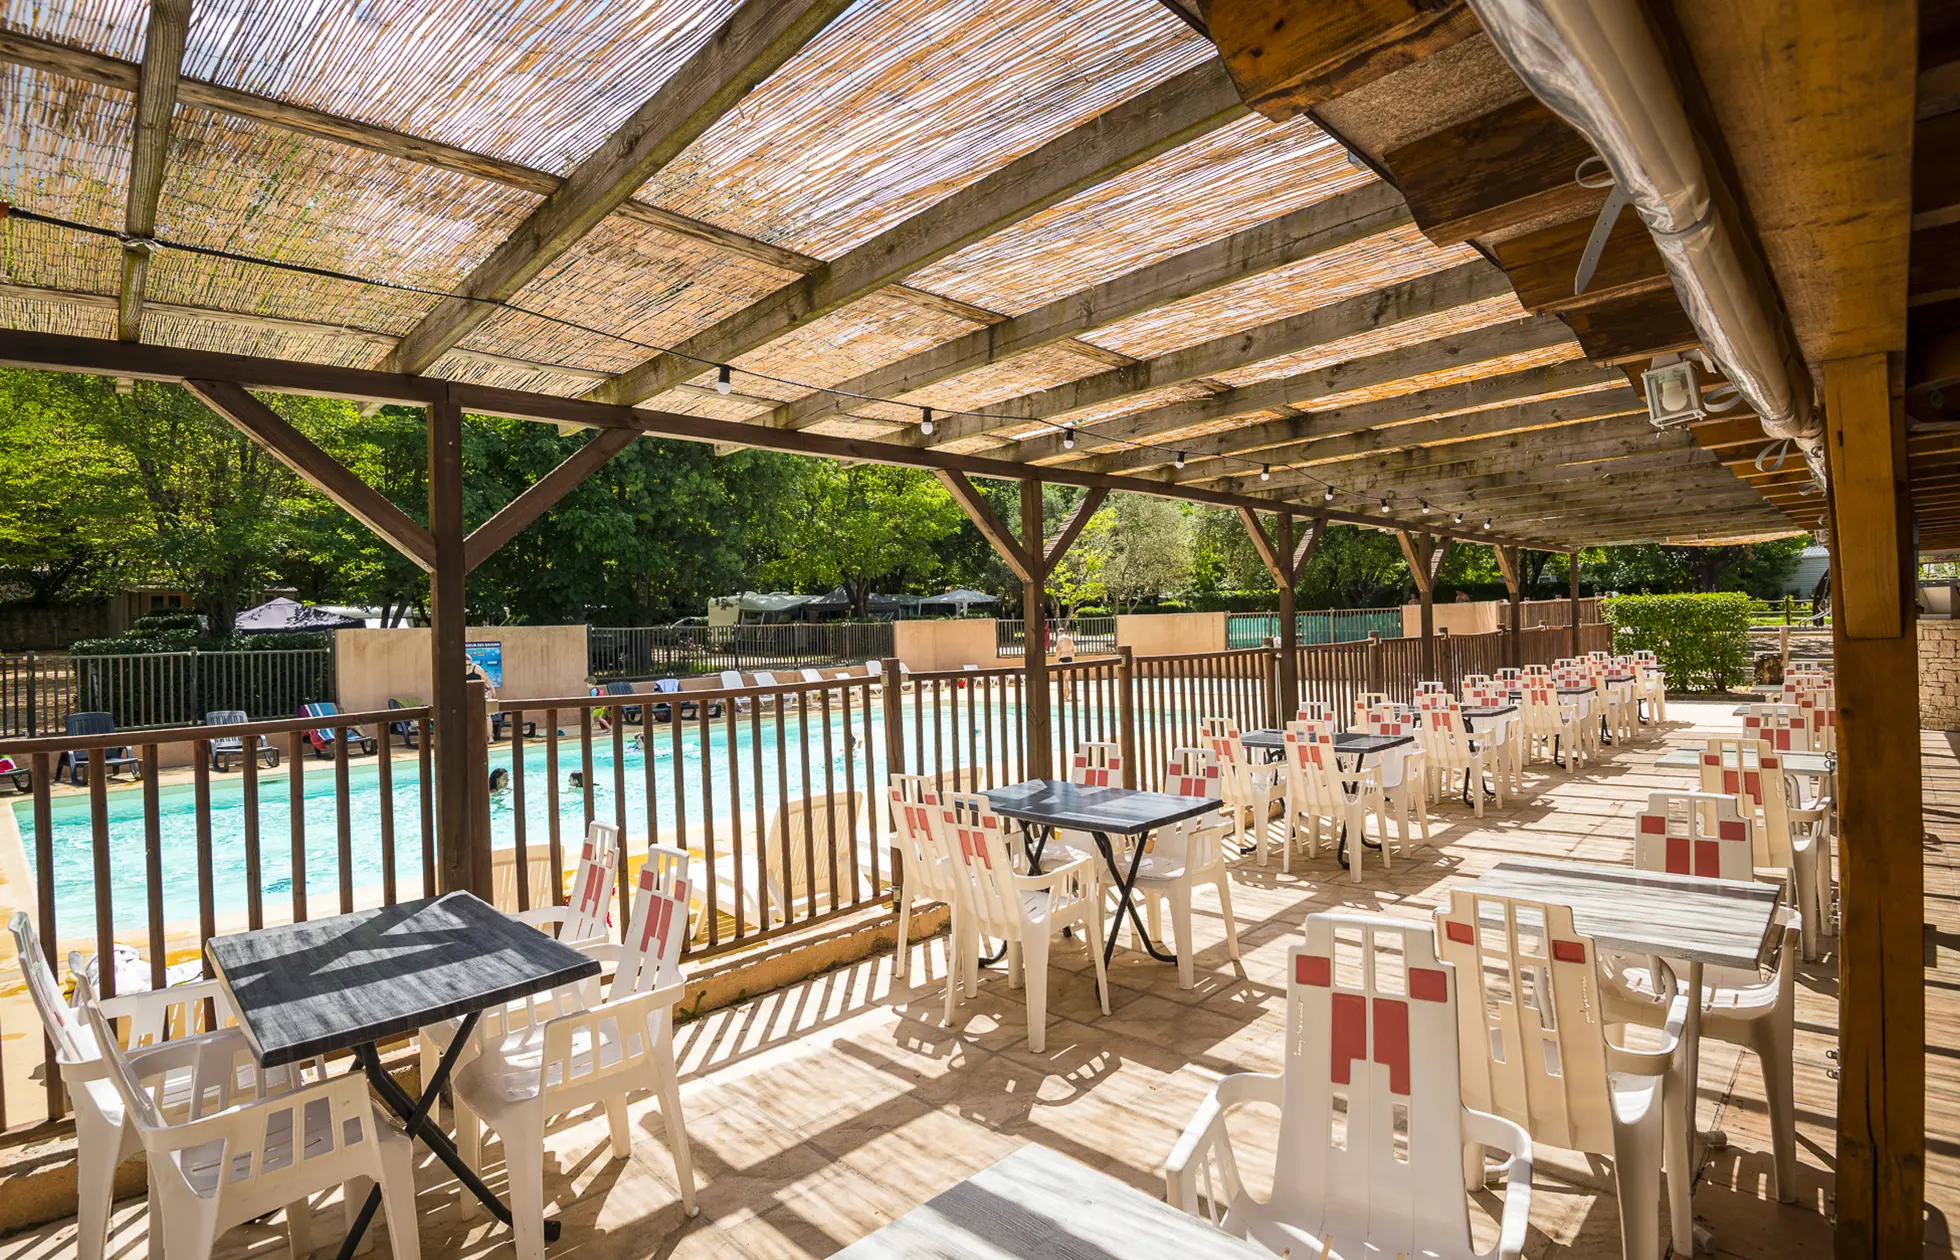 offer ' - '35 - Camping Le Saint Michelet - Service